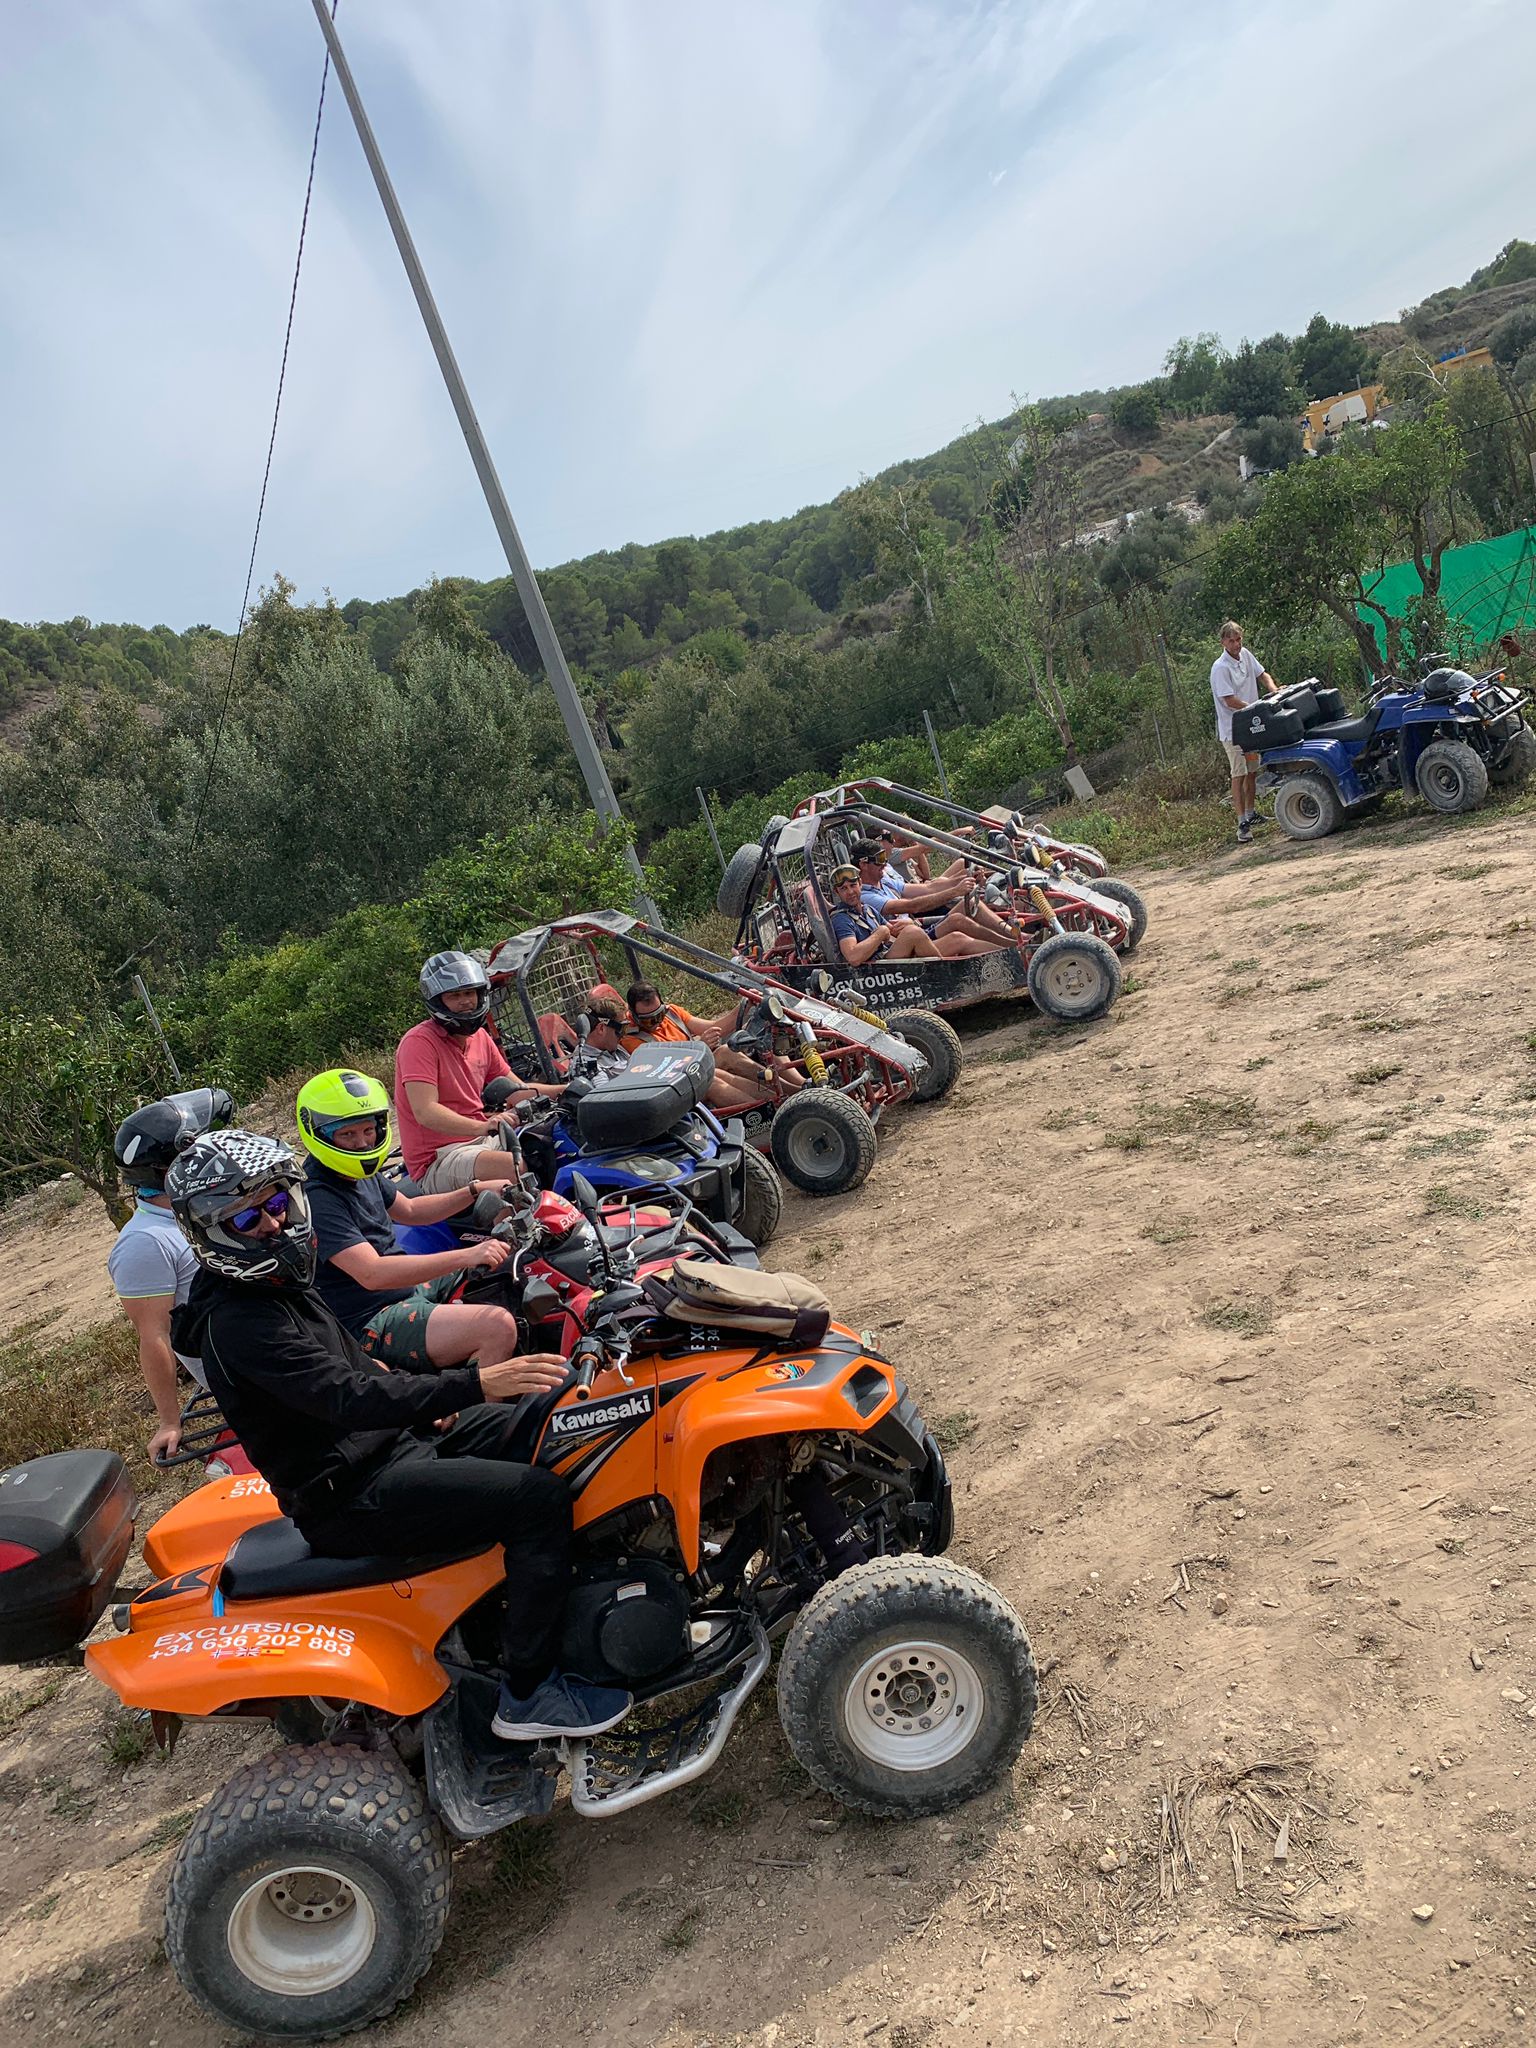 group tour buggies and quads